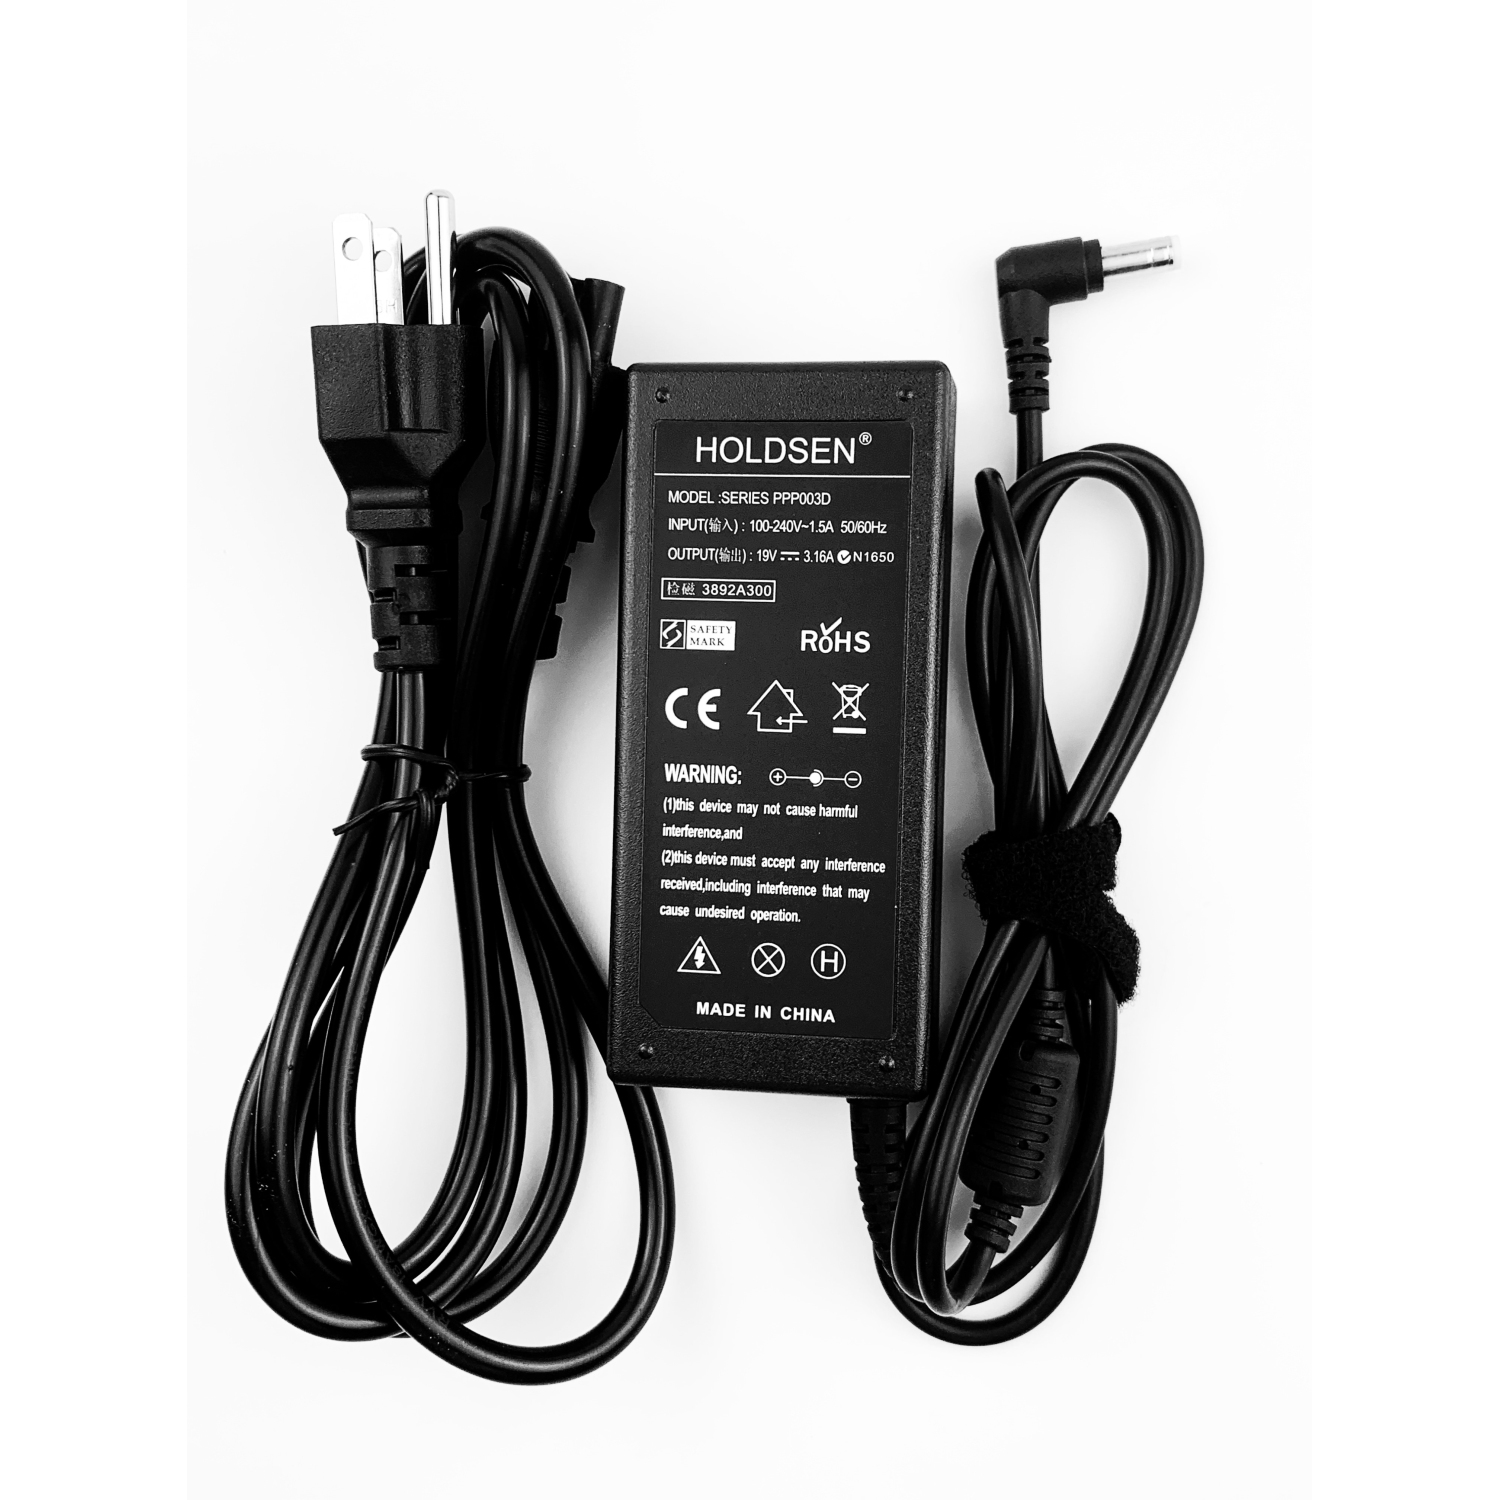 19V 2.37A 3.16A 60W AC adapter power cord for HP 735297-001 Pavilion 22cw 22bw LCD monitors ONLY